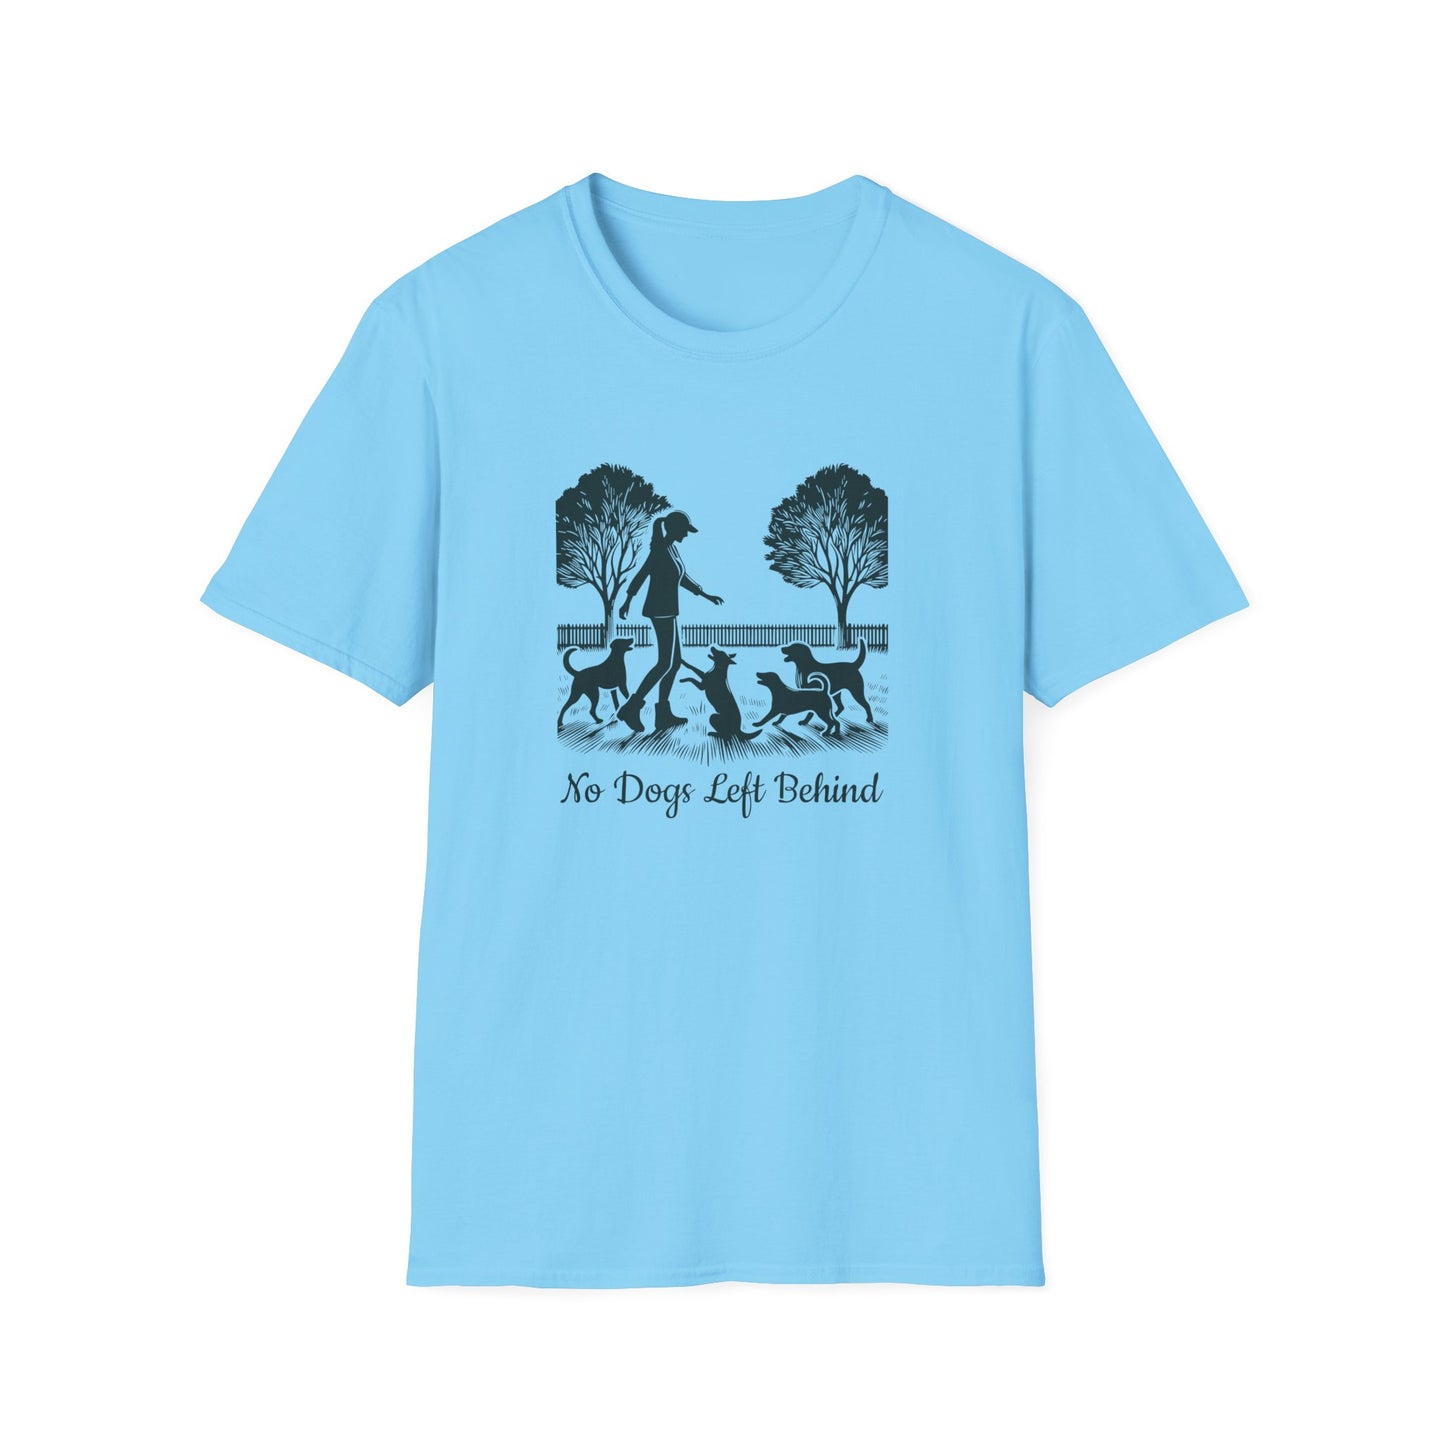 3 No Dogs Left Behind - Unisex Softstyle T-Shirt